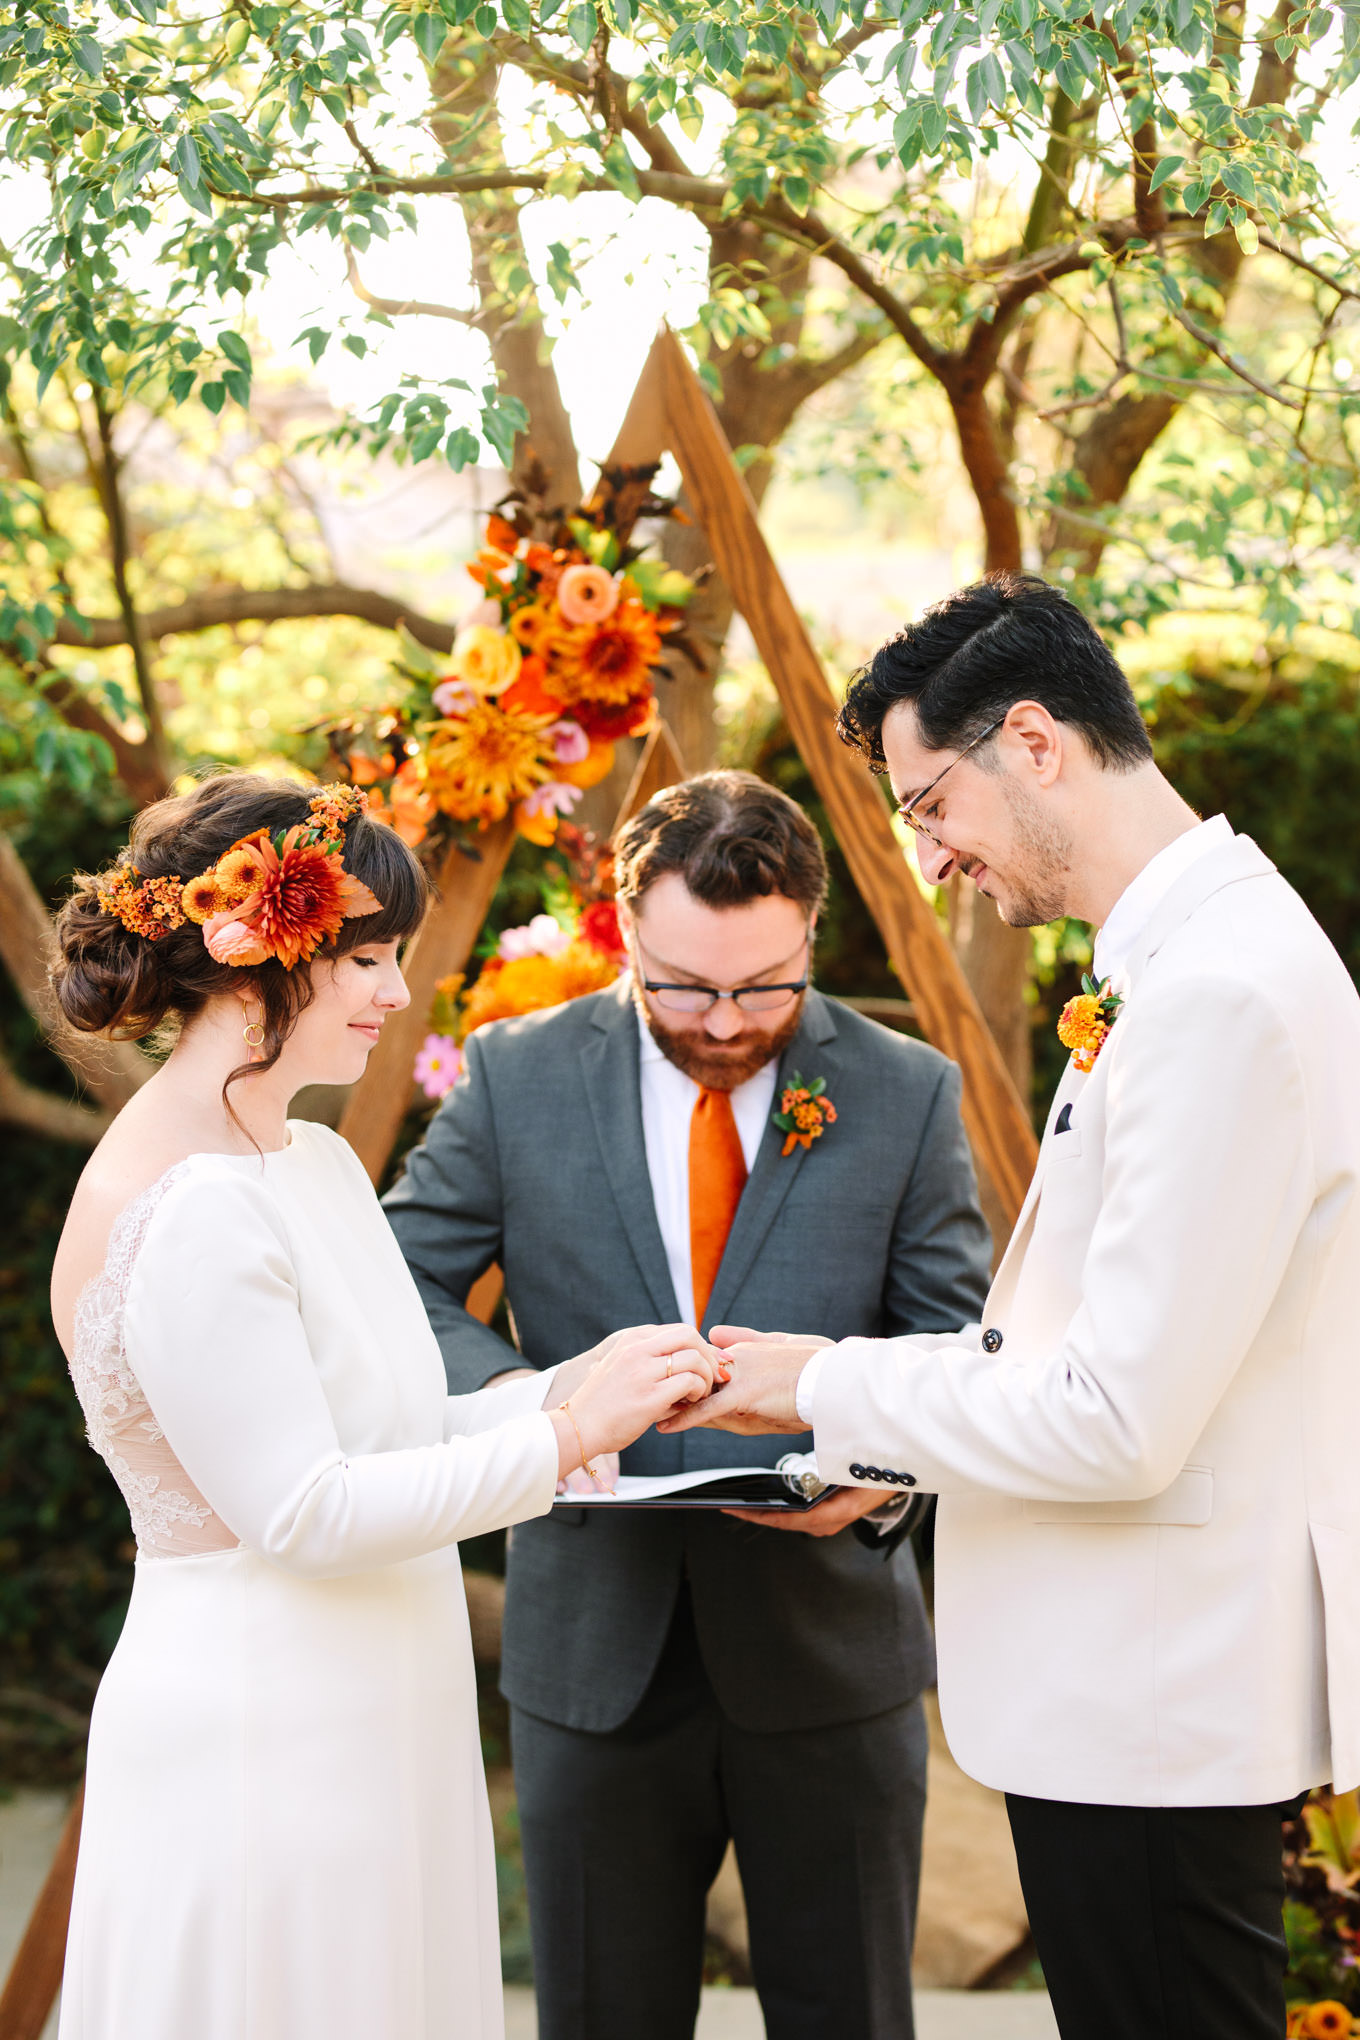 Bride putting on groom's ring with unique ceremony arch | Vibrant backyard micro wedding featured on Green Wedding Shoes | Colorful LA wedding photography | #losangeleswedding #backyardwedding #microwedding #laweddingphotographer Source: Mary Costa Photography | Los Angeles